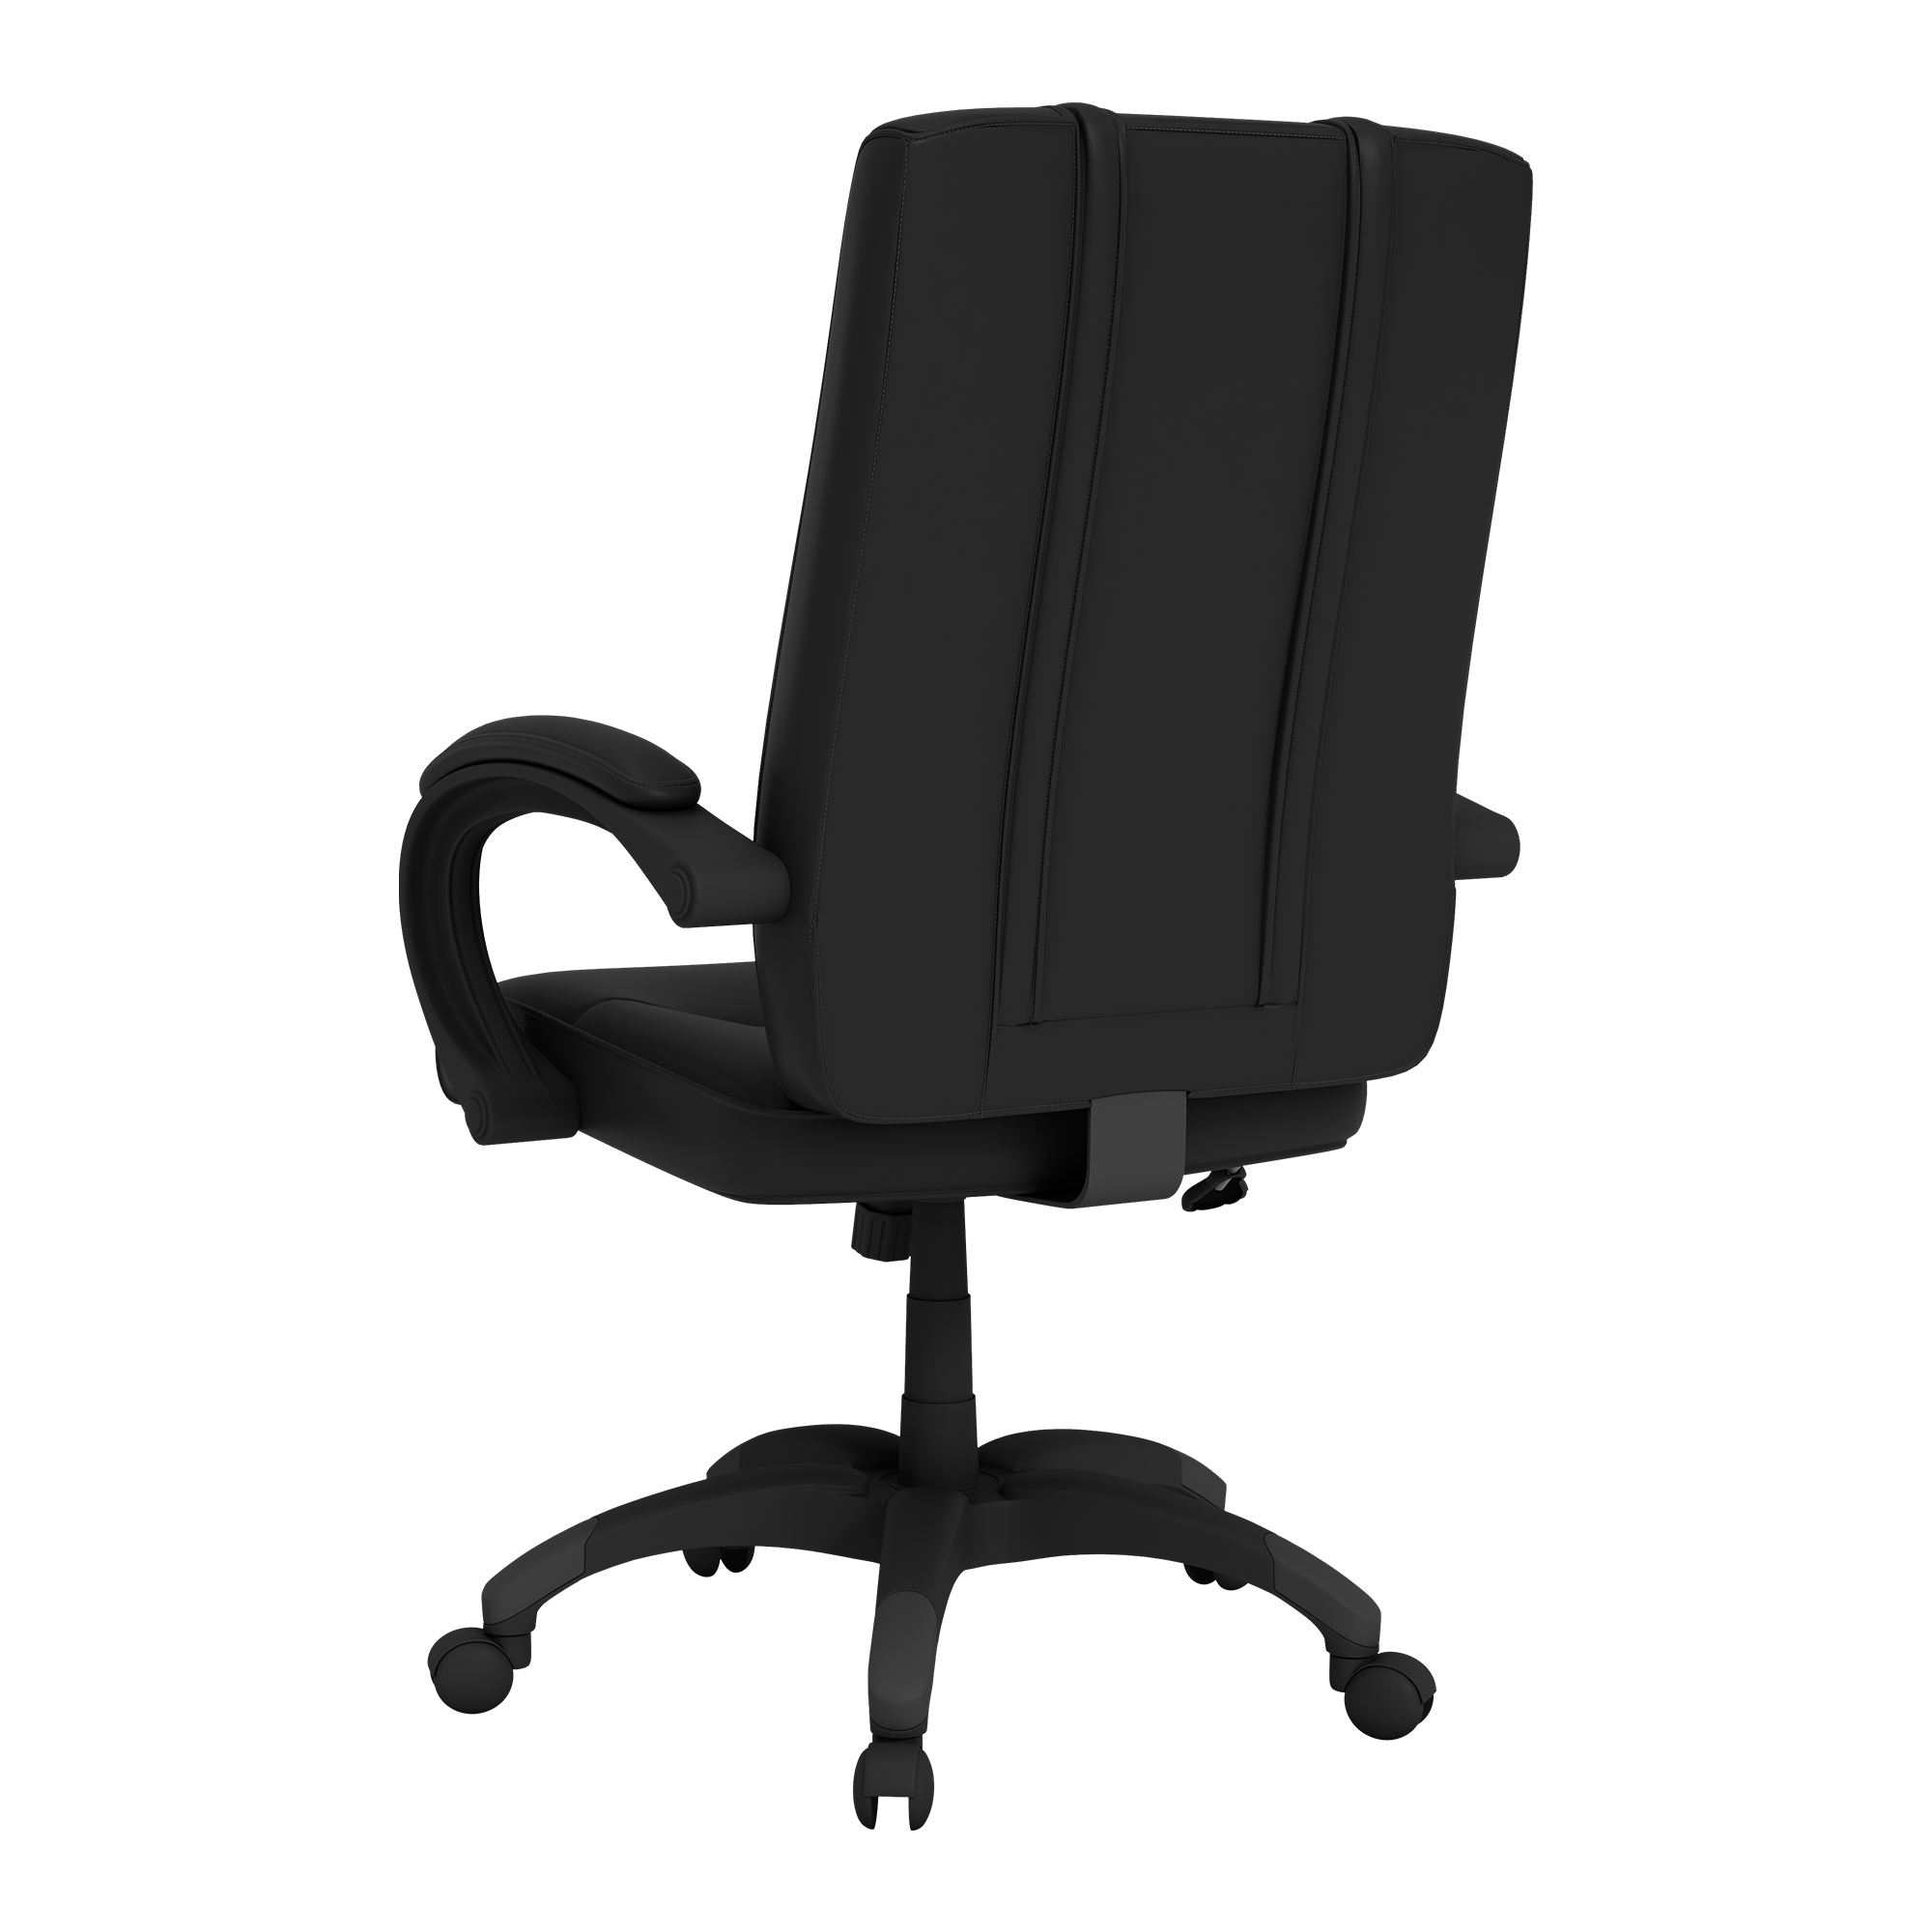 Office Chair 1000 with Philadelphia 76ers GC [CAN ONLY BE SHIPPED TO PENNSYLVANIA]